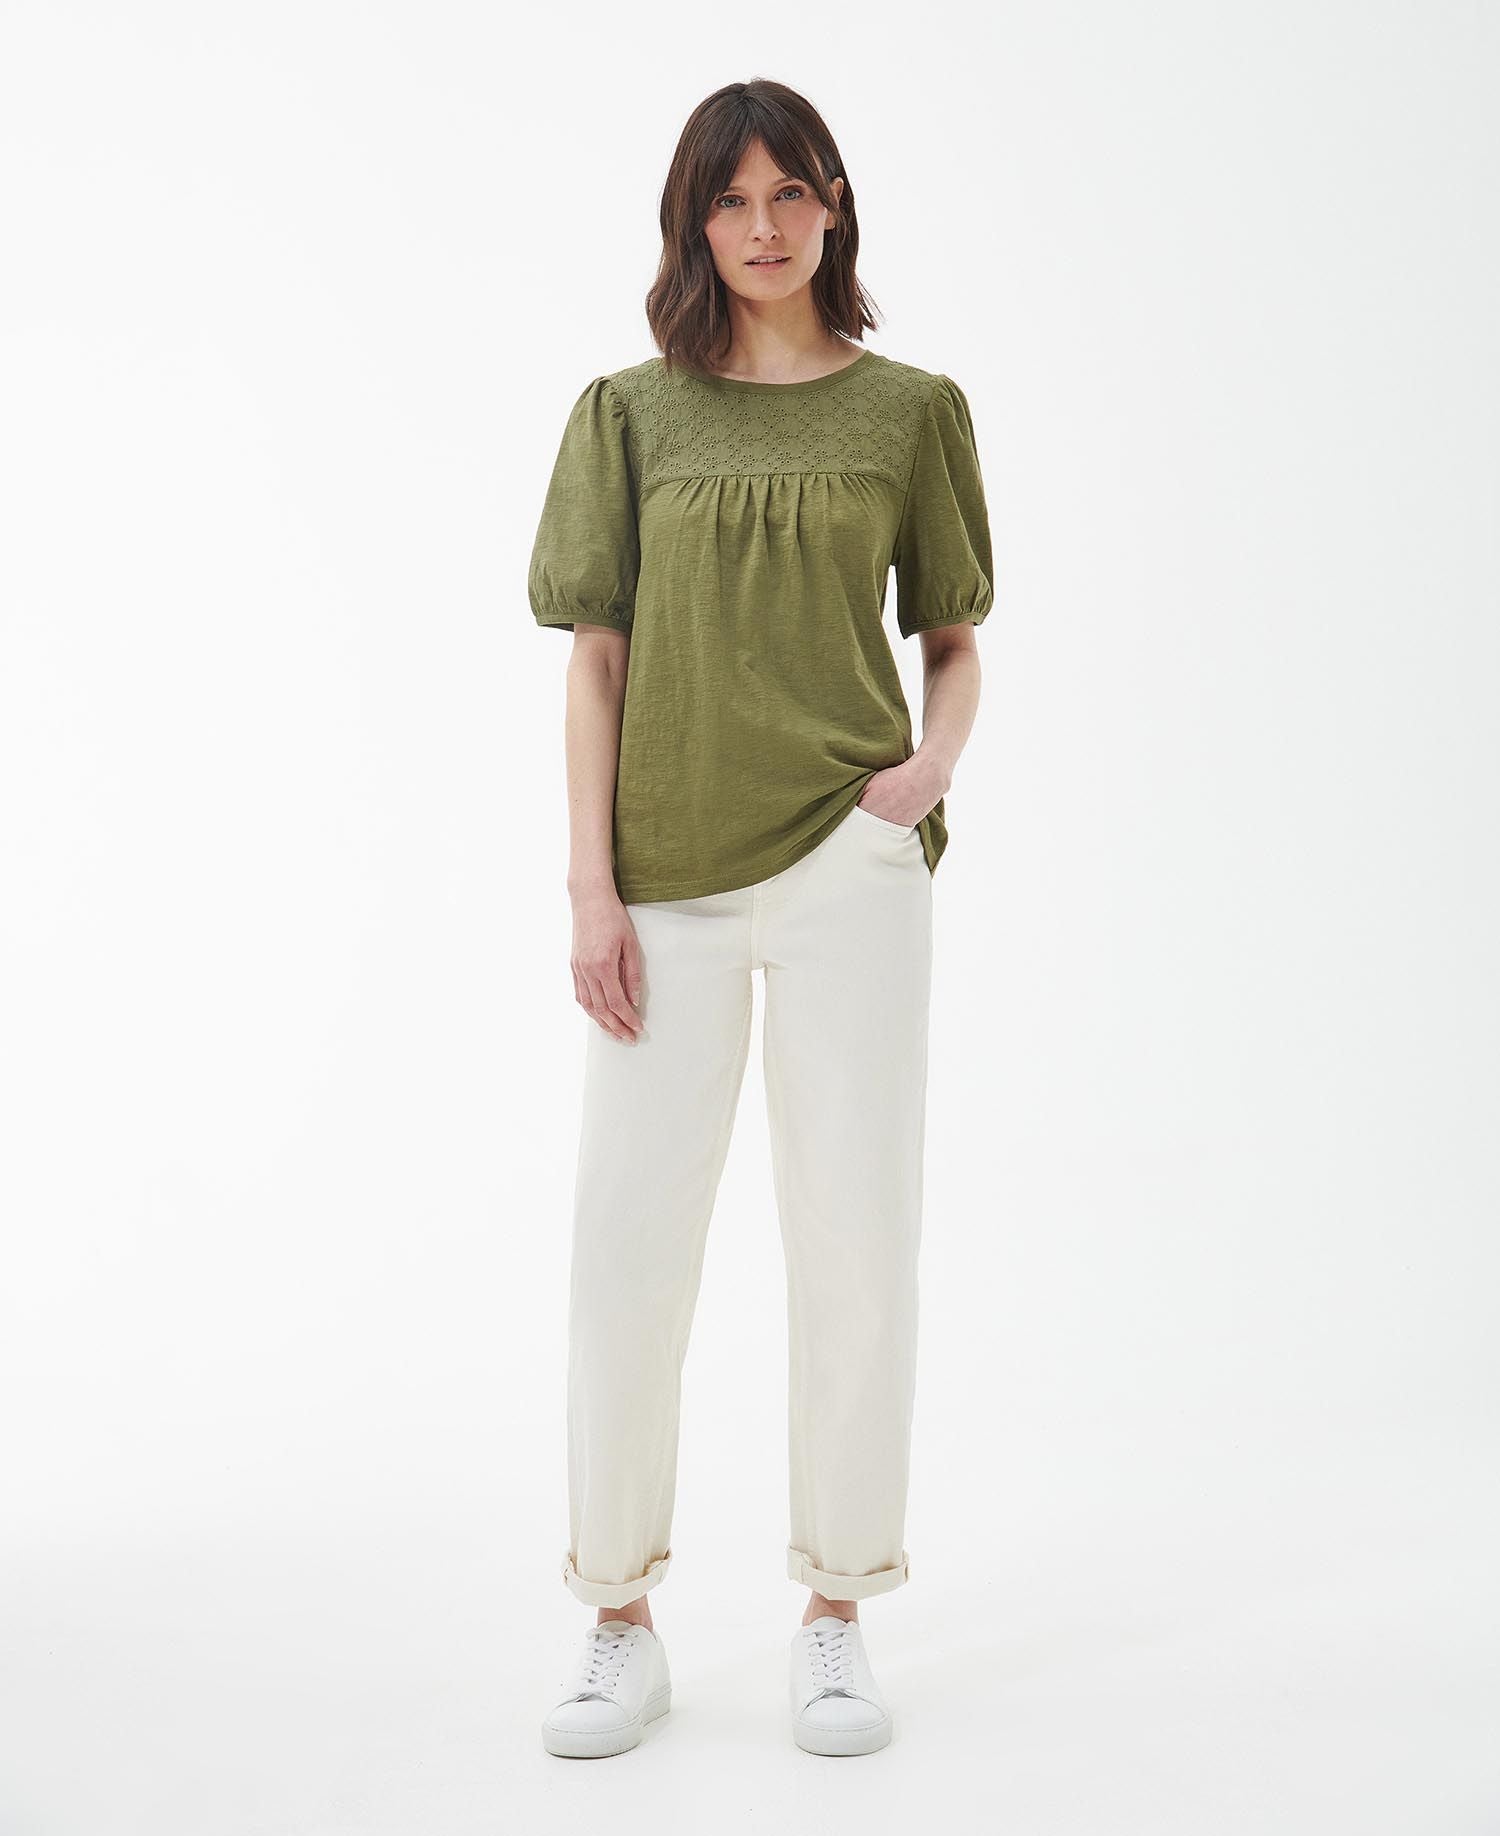 Barbour Pearl Top - Olive Tree Green